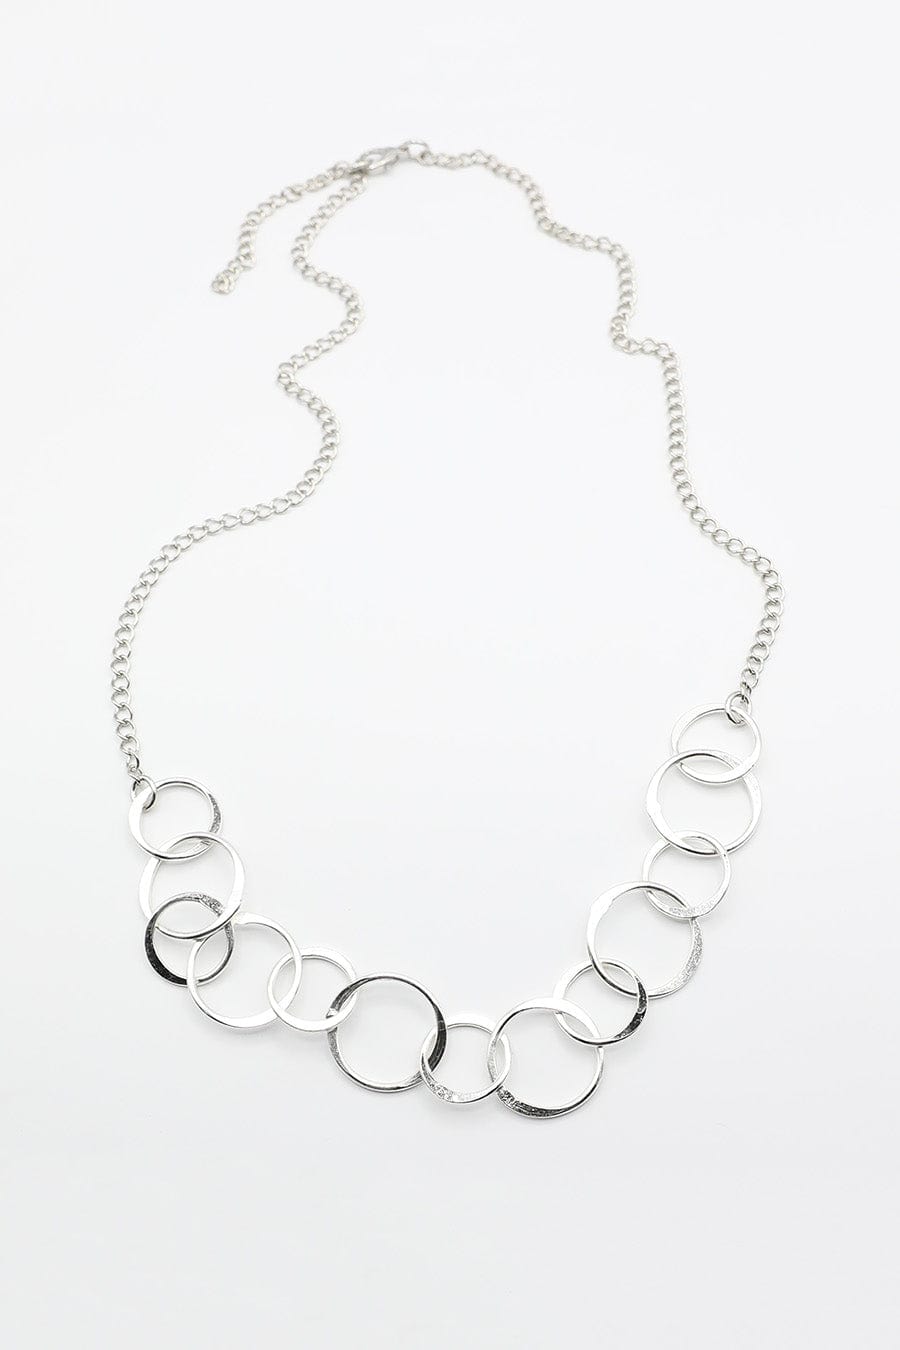 Cascade Of Silver Rings Necklace